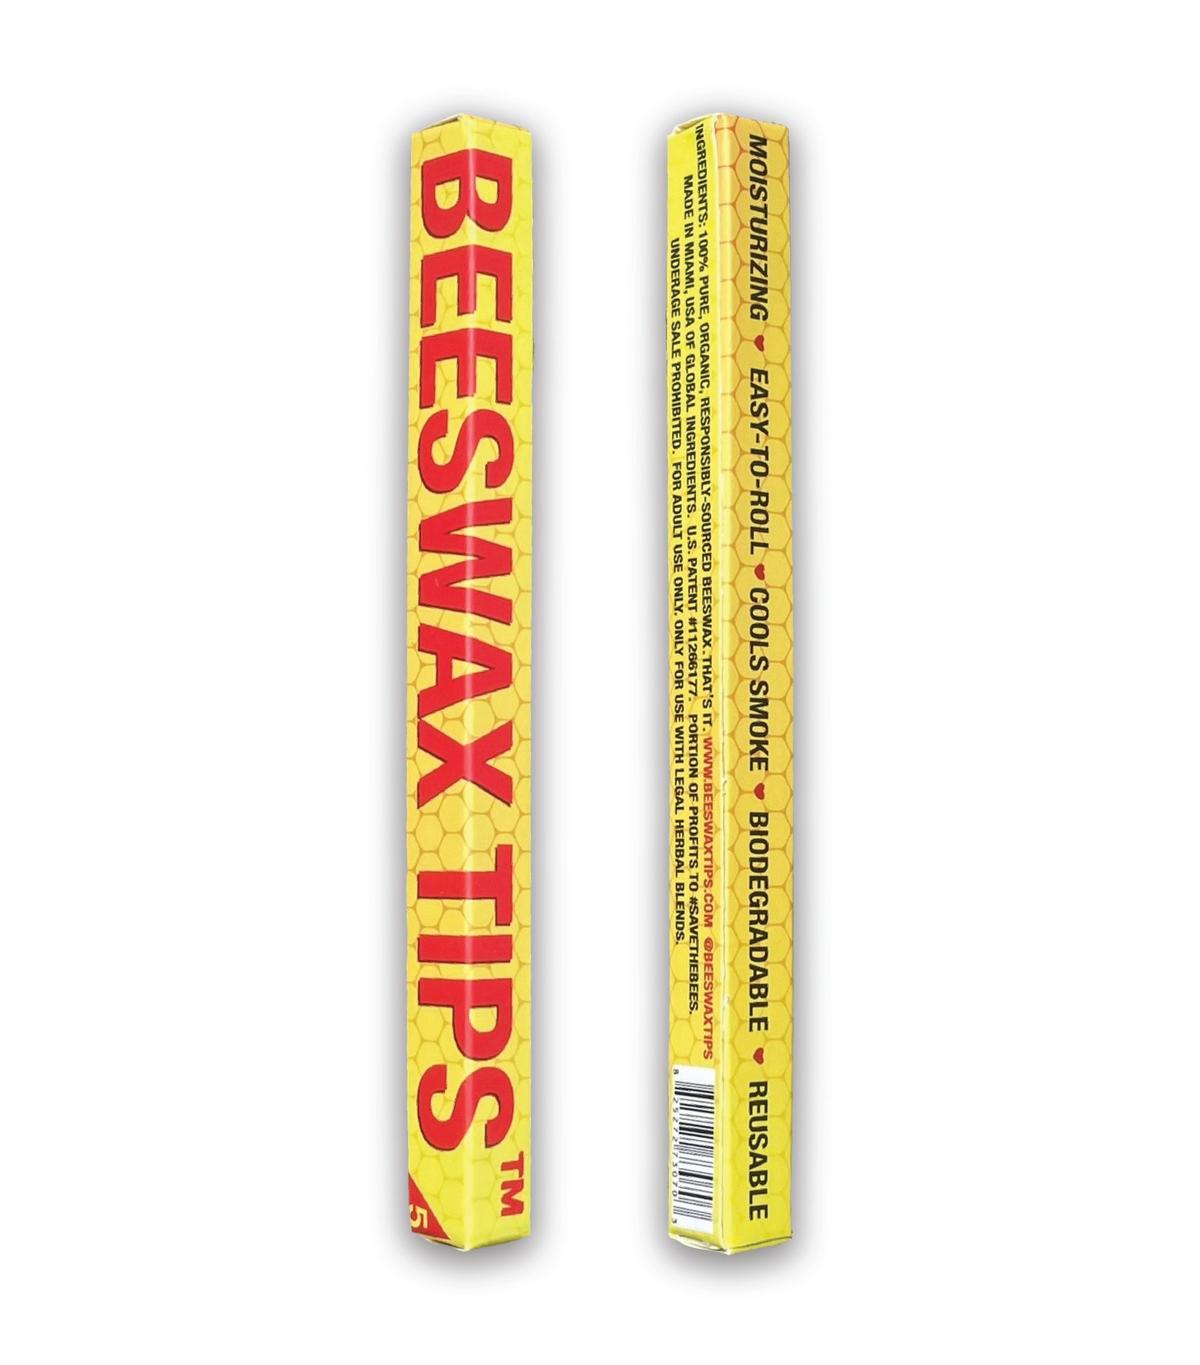 beeswax tips joint filters 5 pack